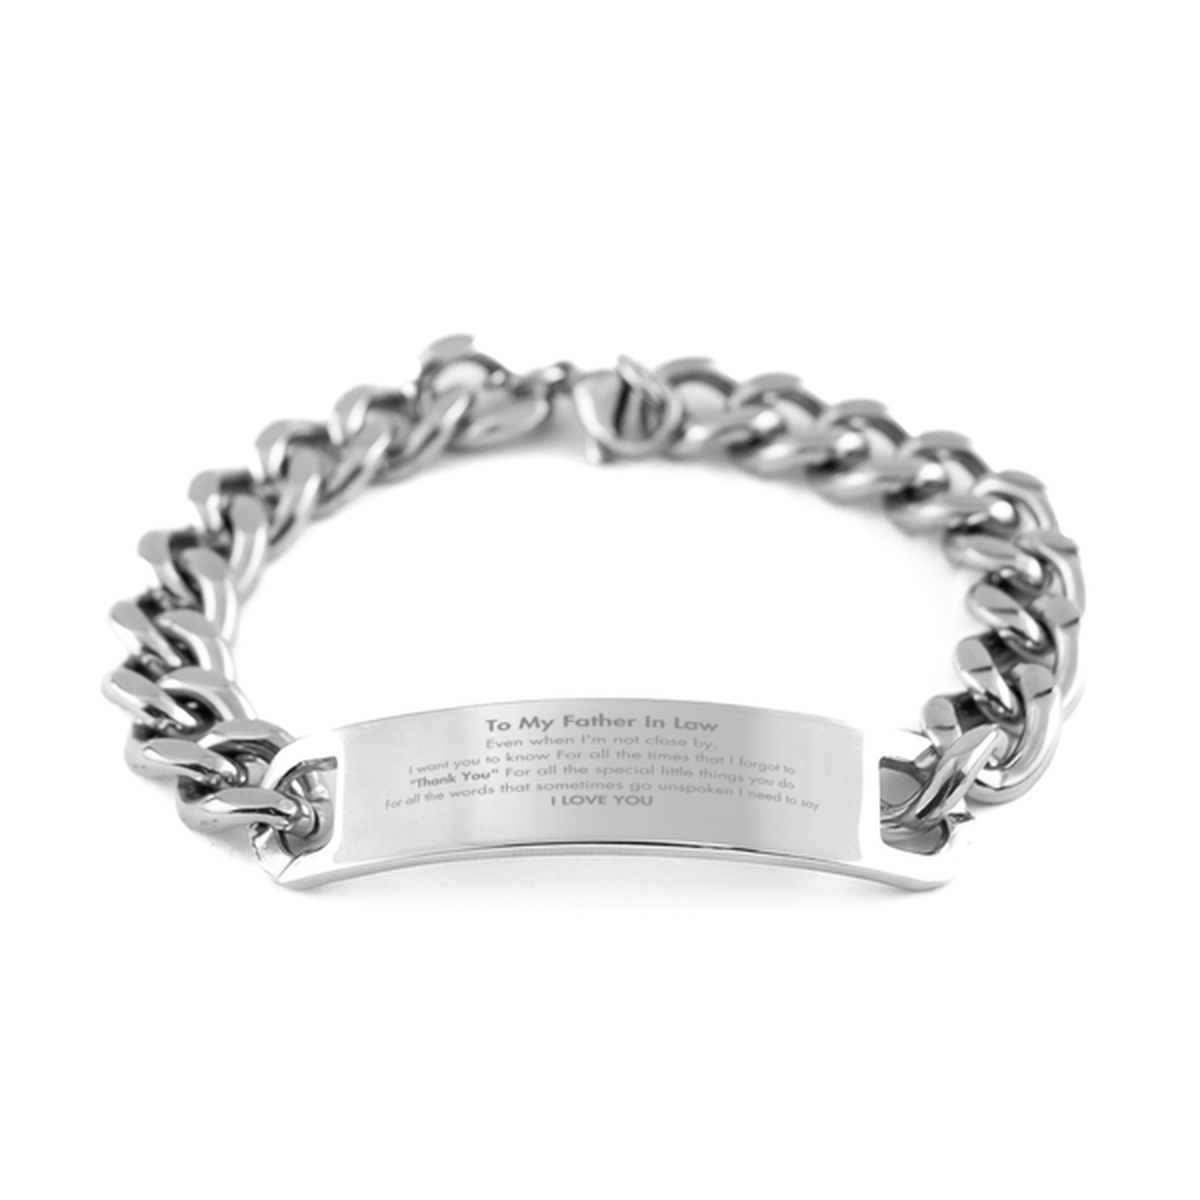 Thank You Gifts for Father In Law, Keepsake Cuban Chain Stainless Steel Bracelet Gifts for Father In Law Birthday Mother's day Father's Day Father In Law For all the words That sometimes go unspoken I need to say I LOVE YOU